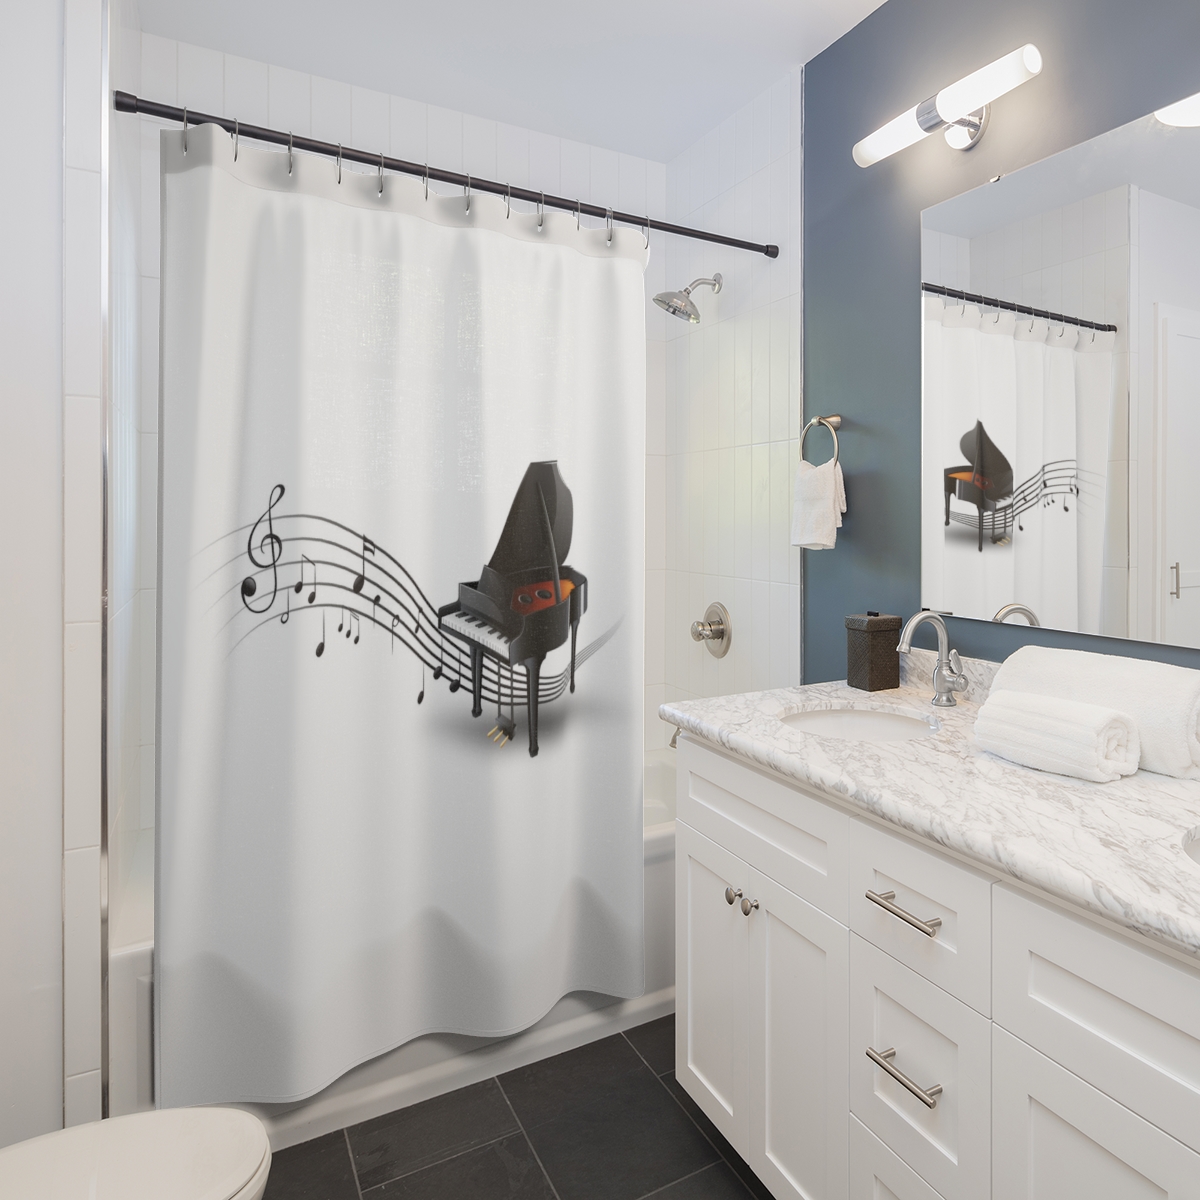 Shower Curtains Piano product thumbnail image